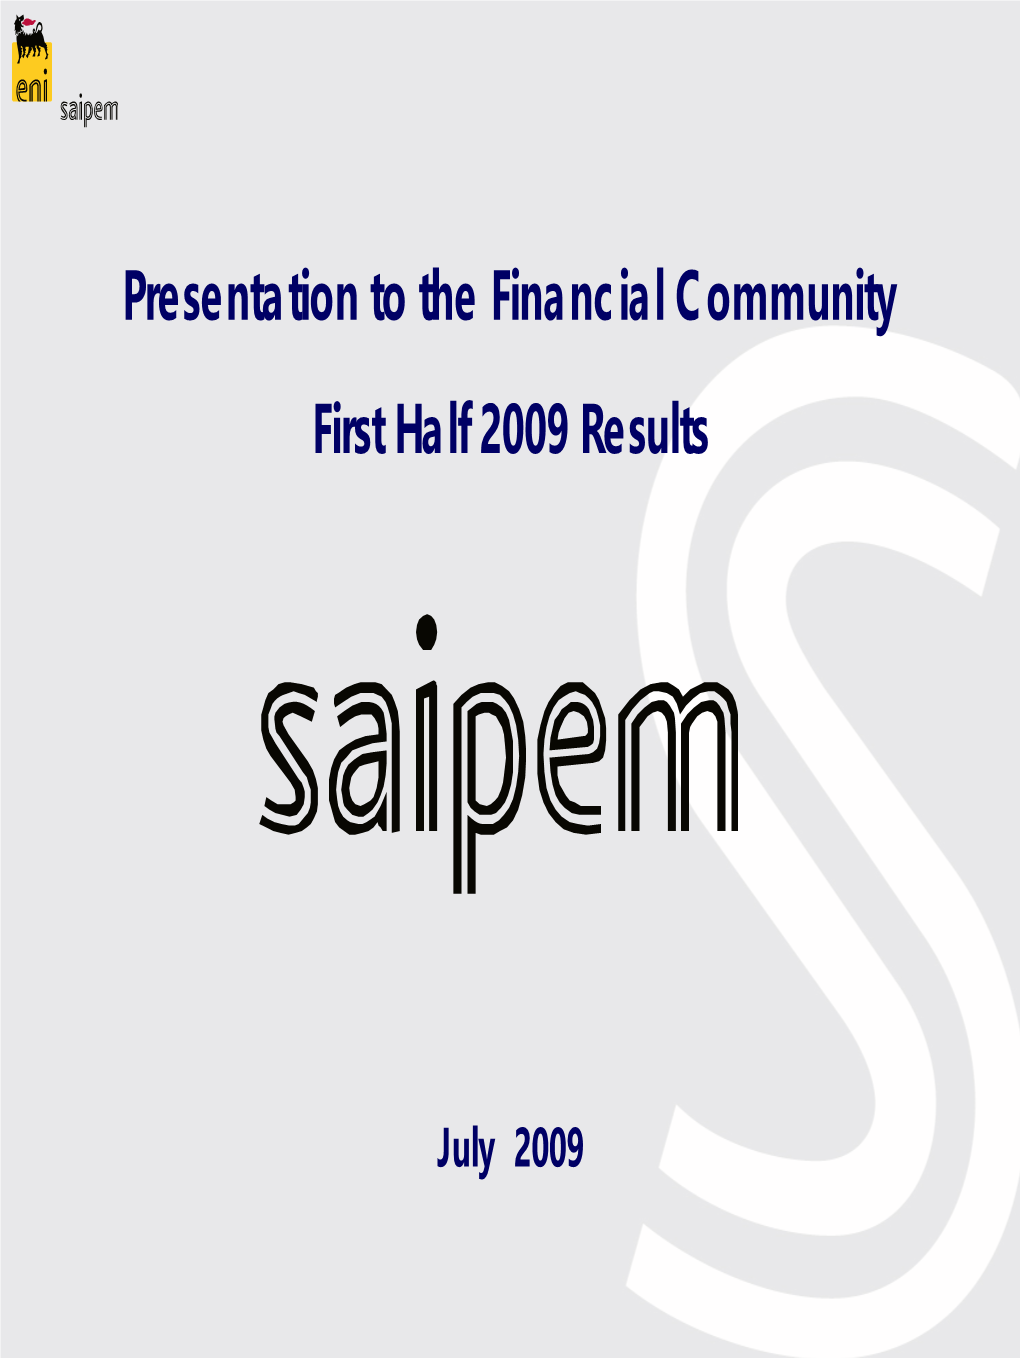 Presentation to the Financial Community First Half 2009 Results